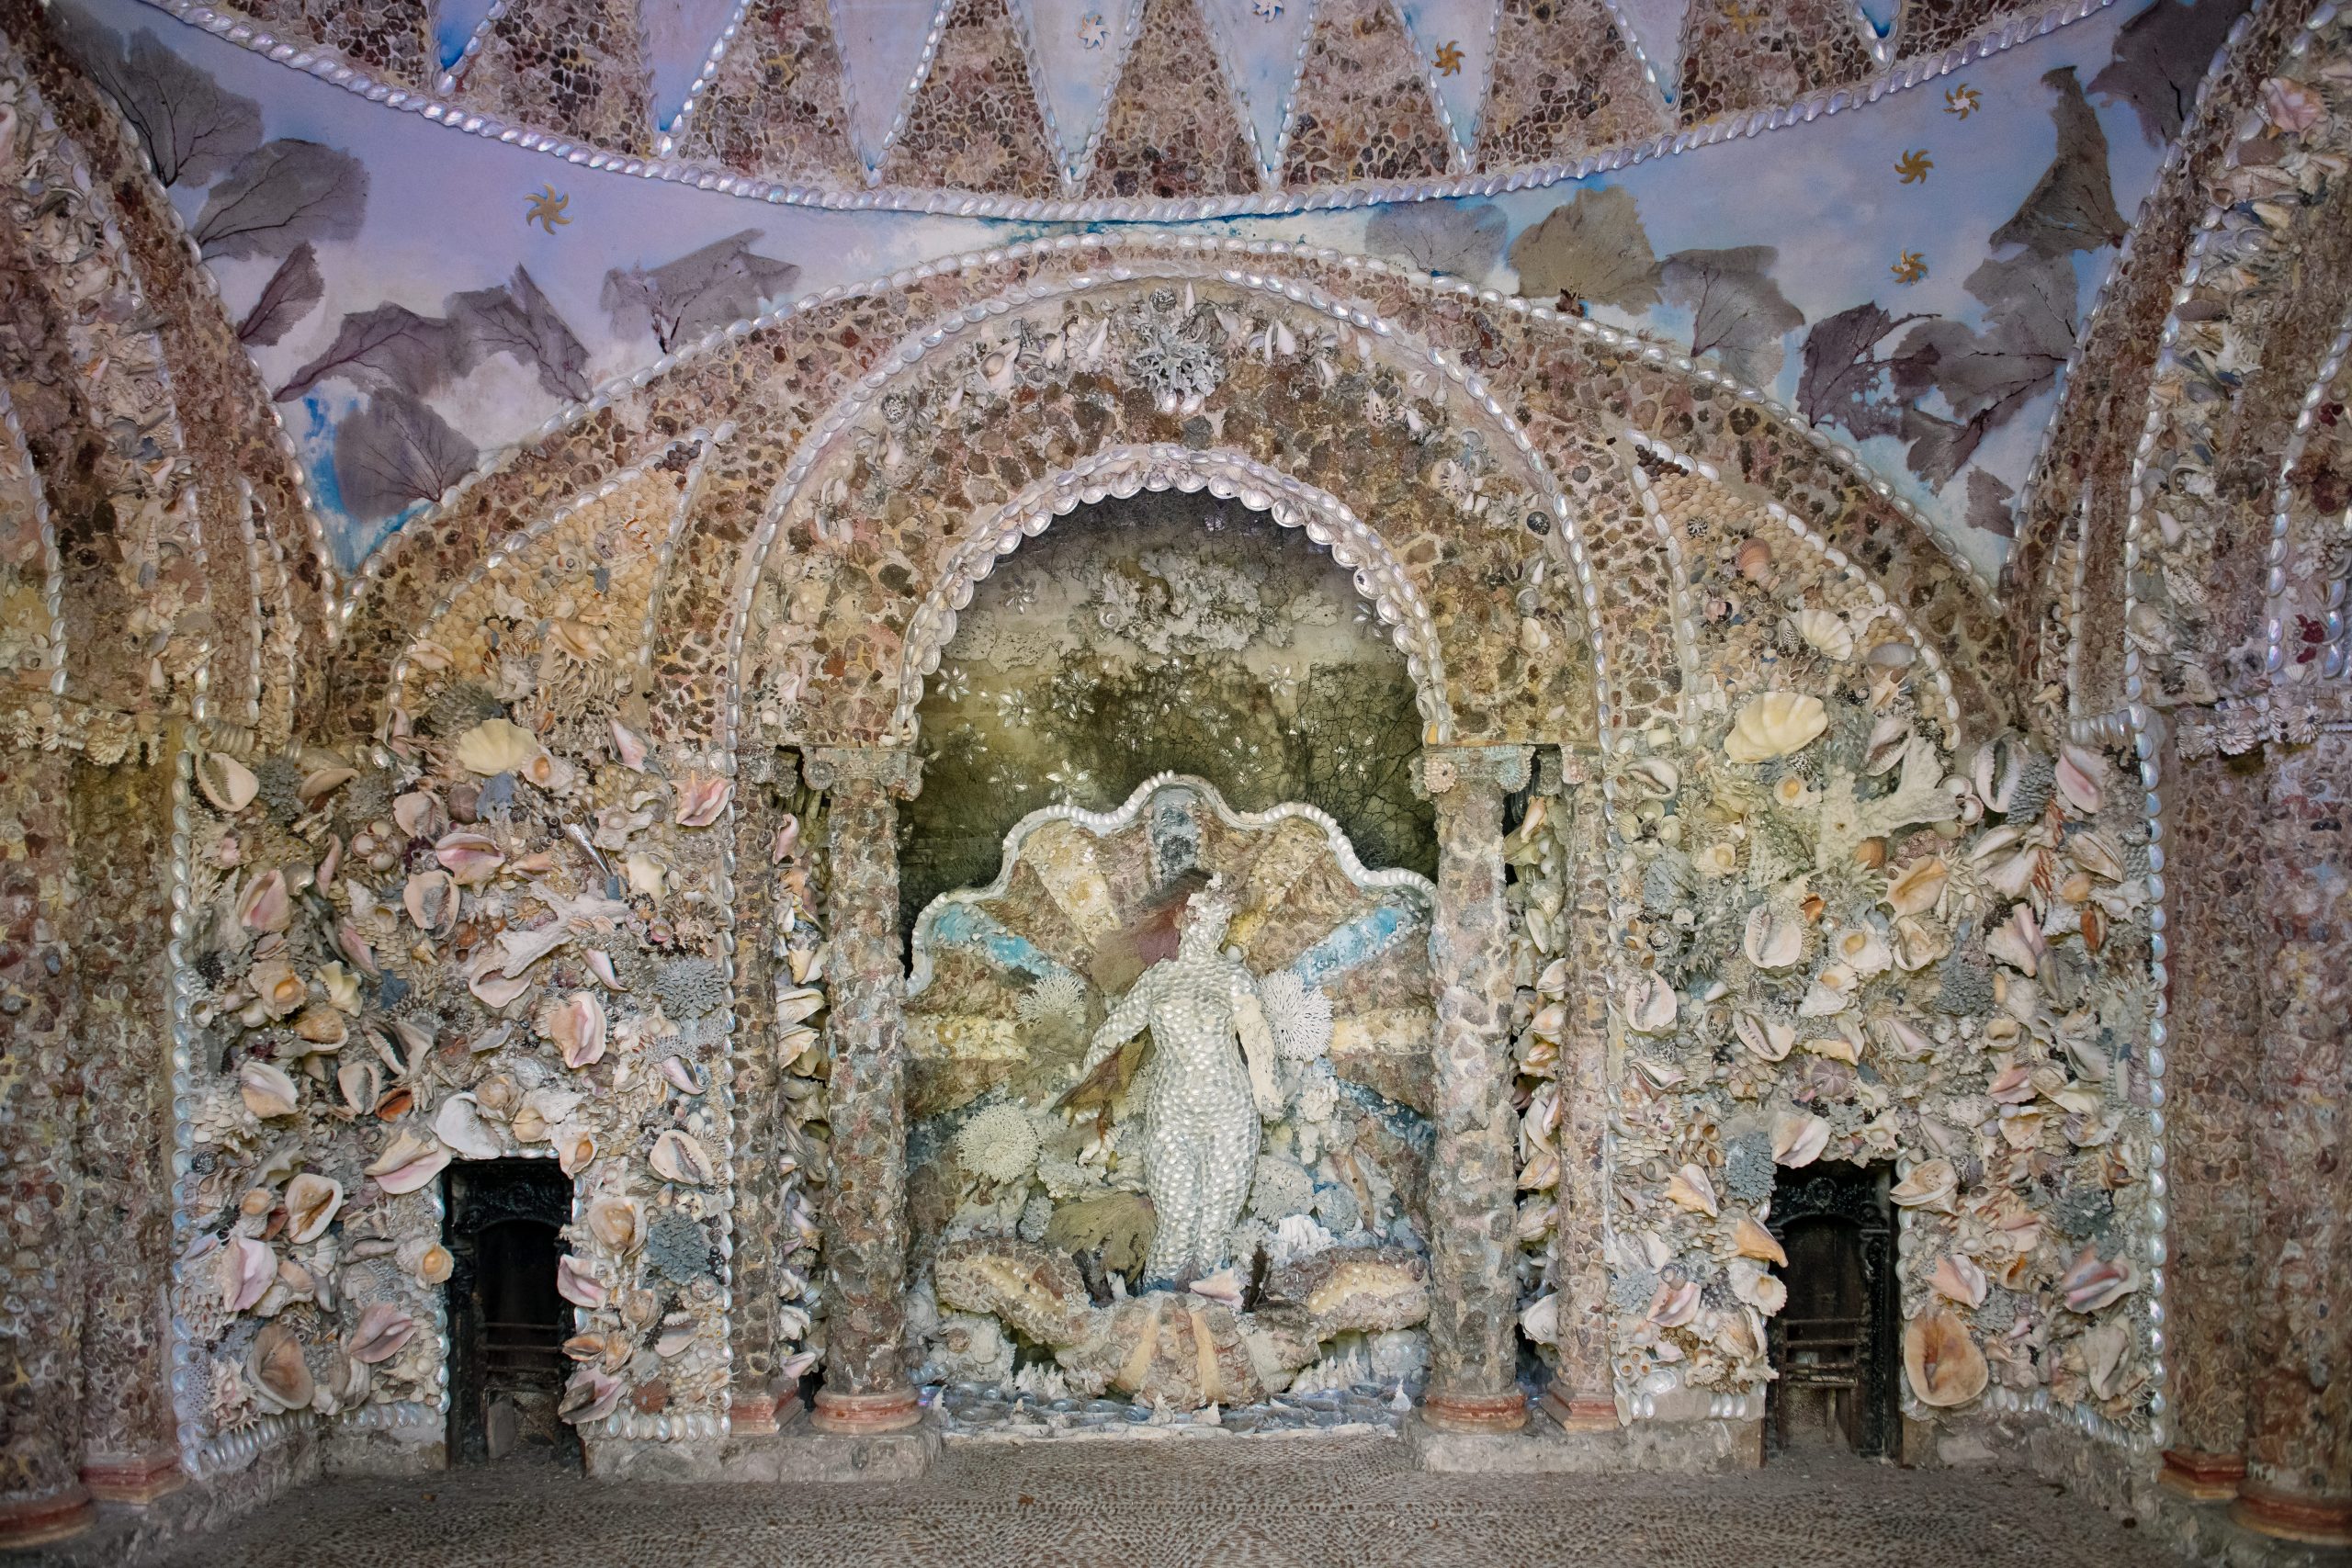 Inside the shell grotto